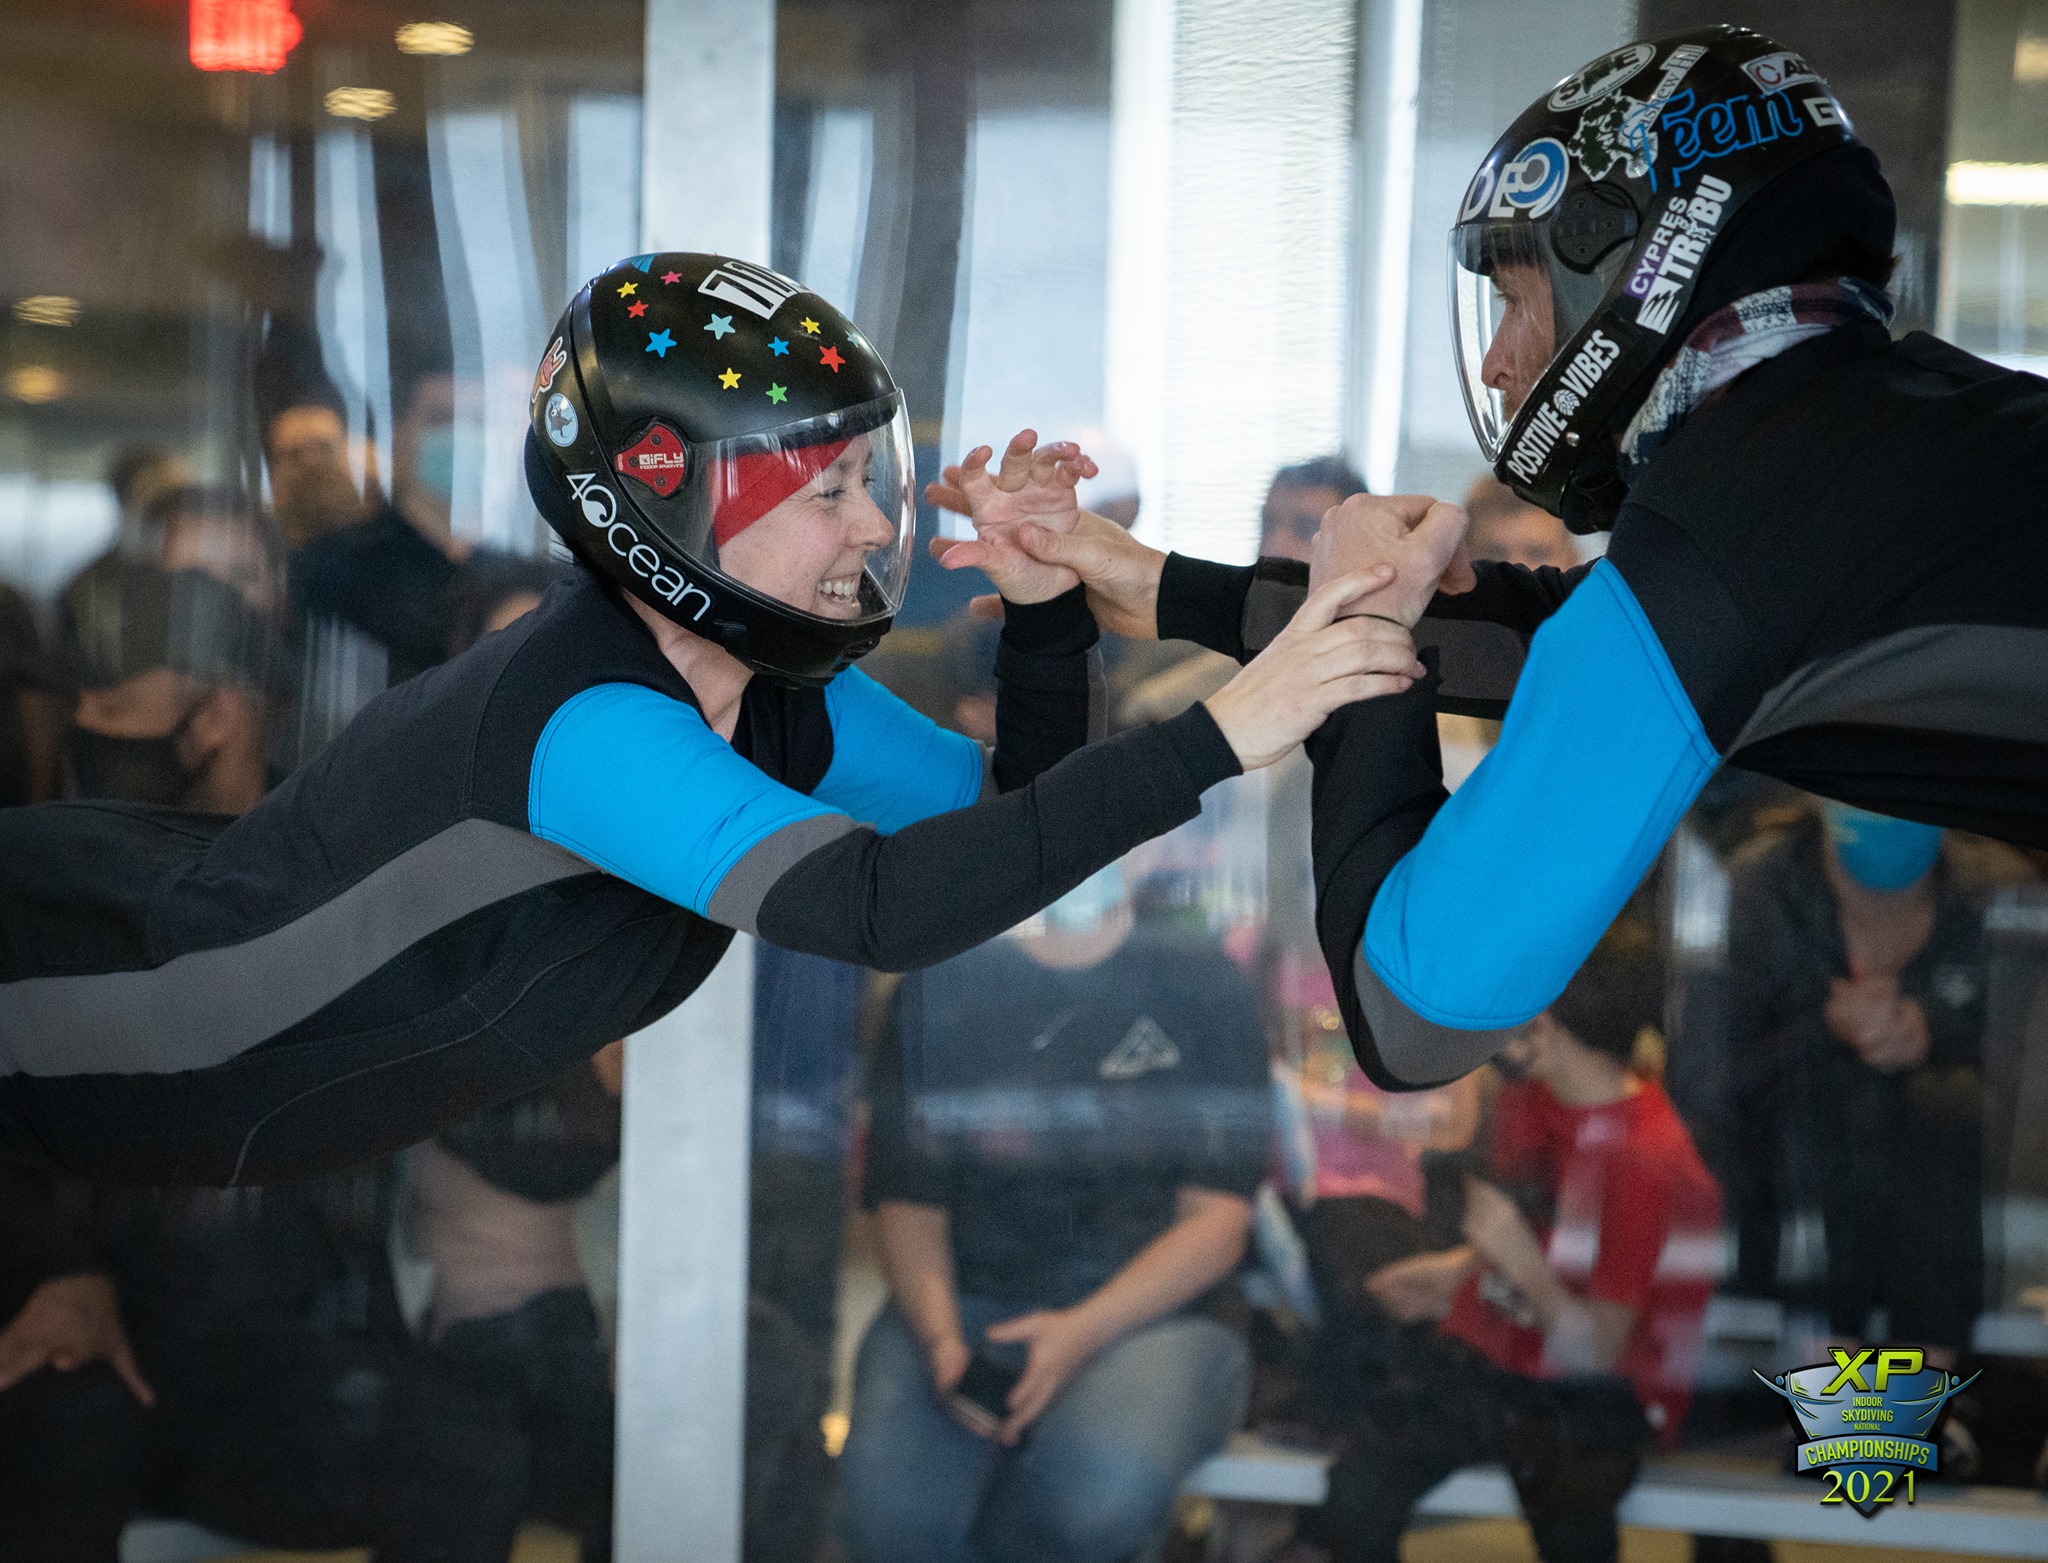 differences between indoor skydiving and skydiving